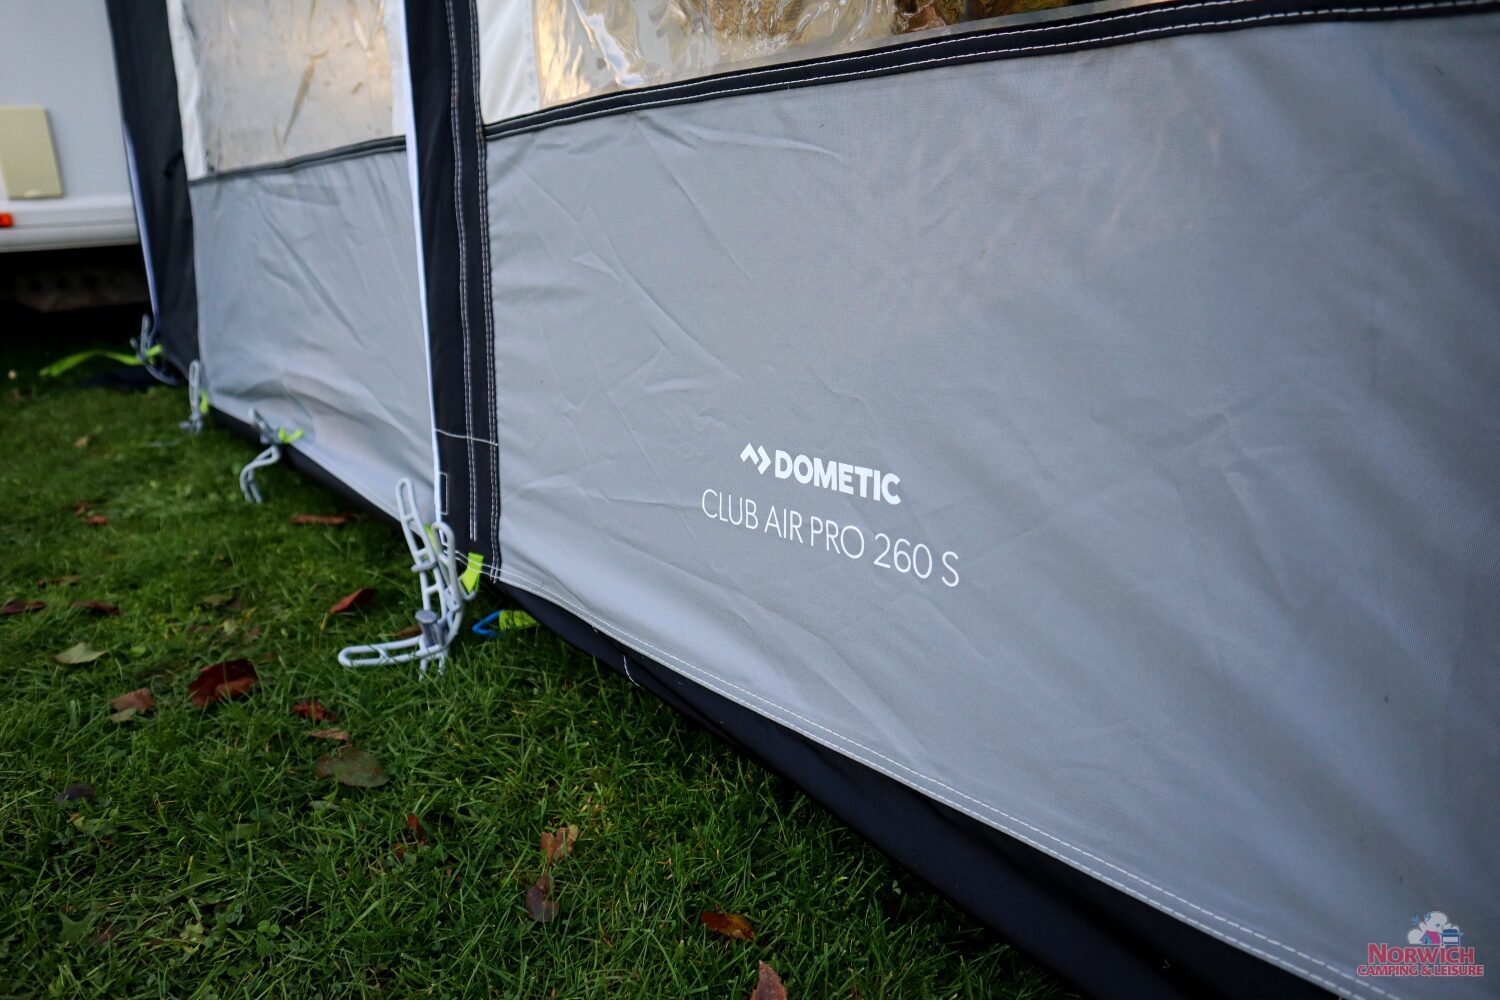 Dometic Club Air Pro 260 S Awning 2021